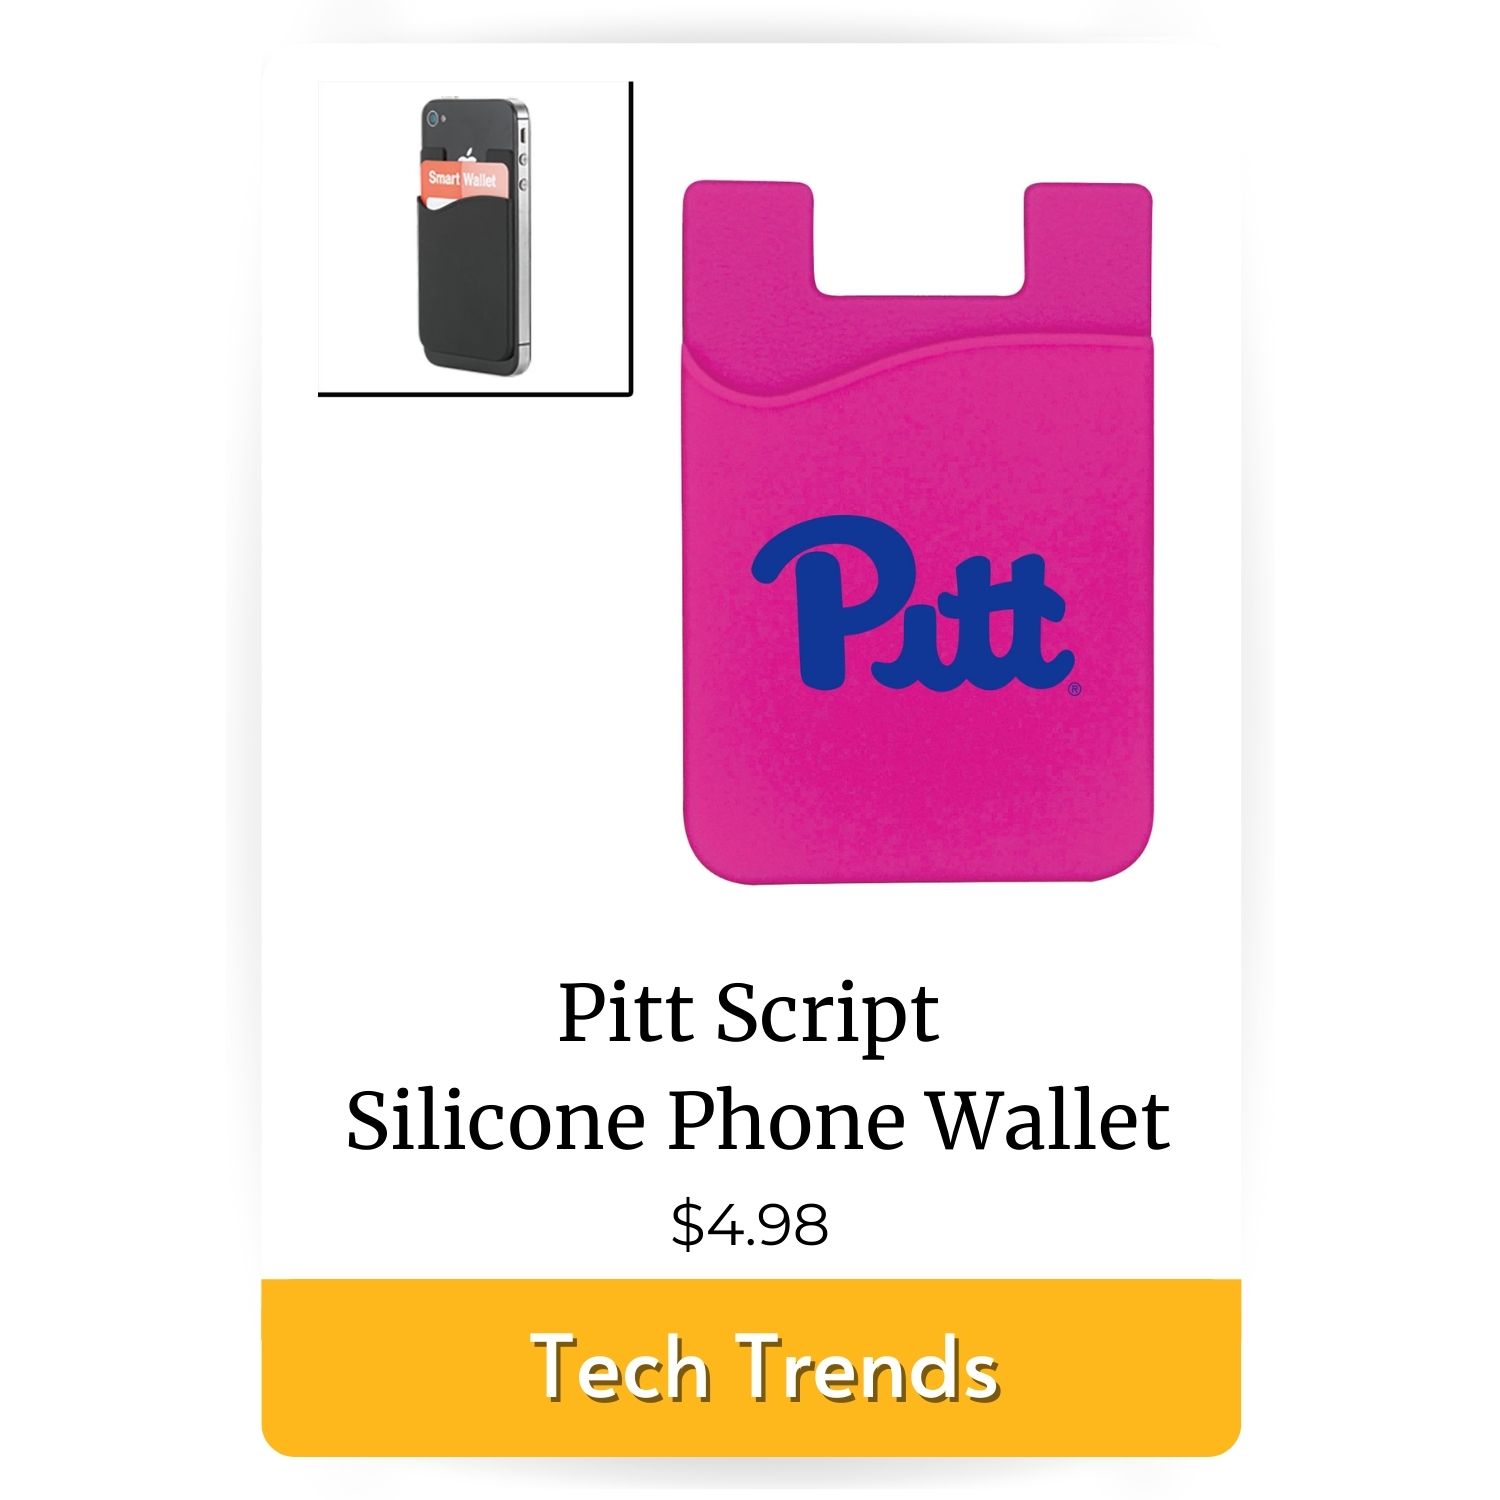 tech trends featured product pitt script pink silicone wallet 4.98 dollars